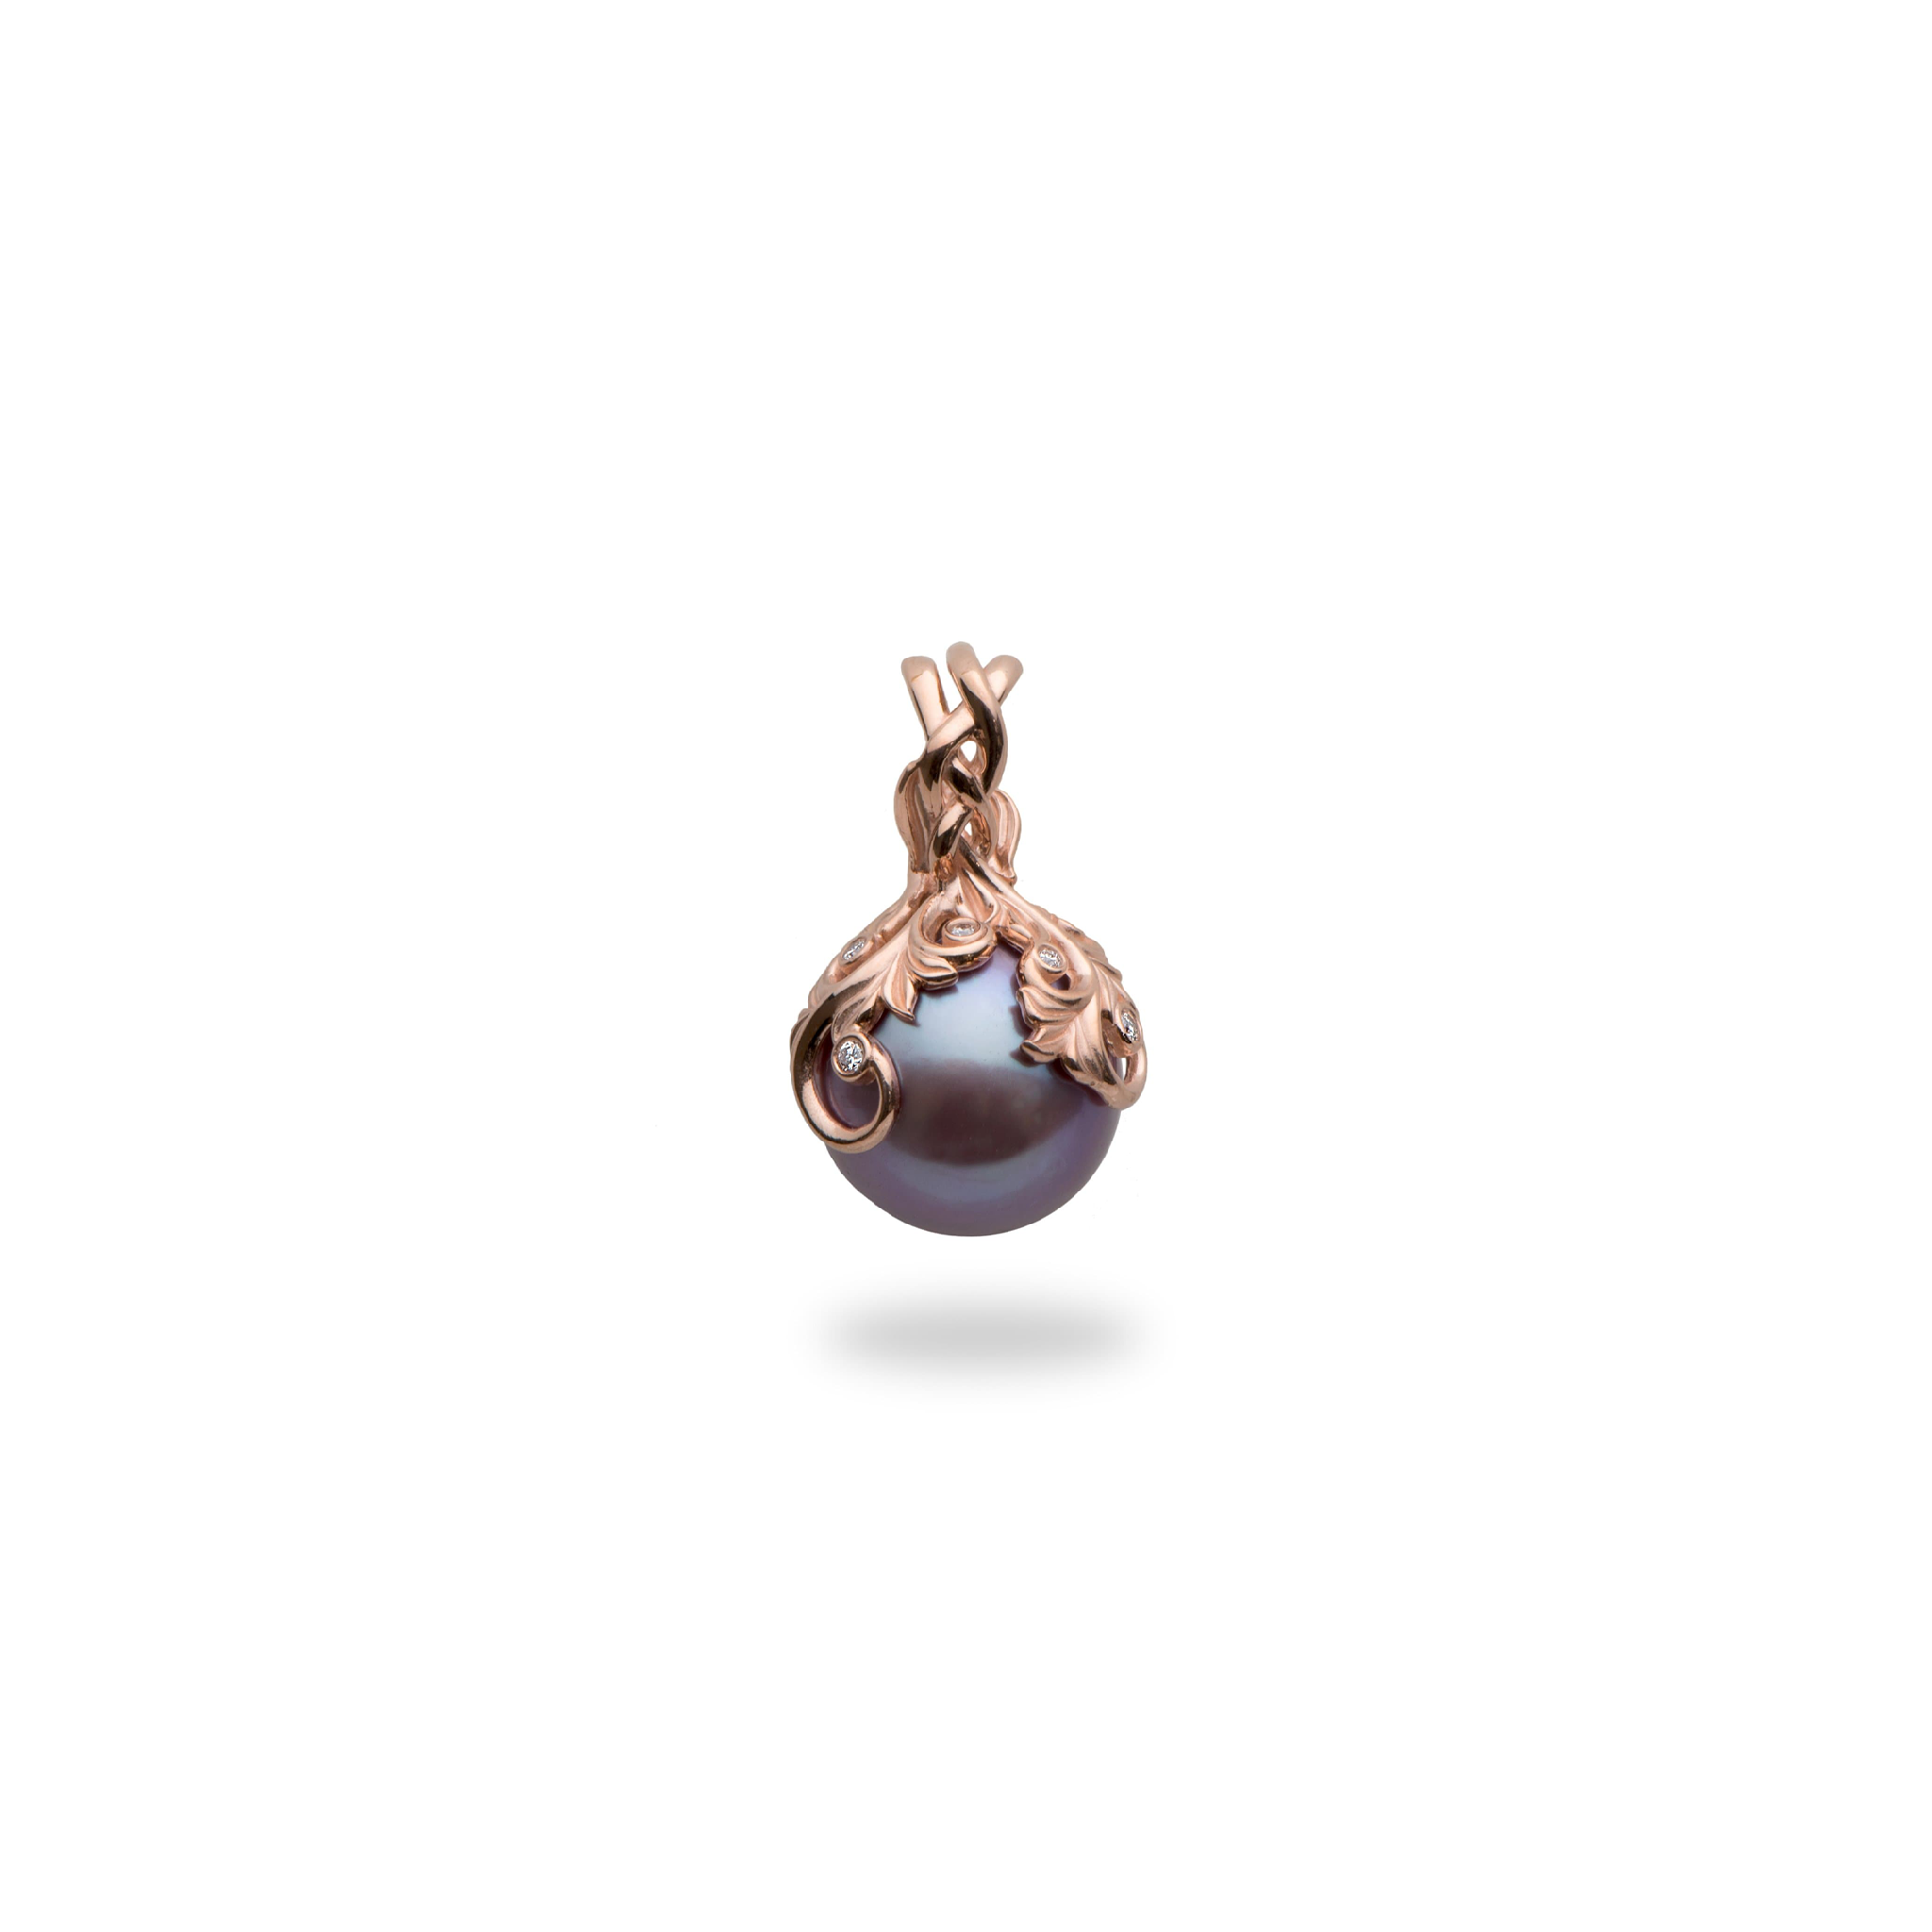 Living Heirloom Ultraviolet Freshwater Pearl Pendant in Rose Gold with Diamonds - 12-13mm